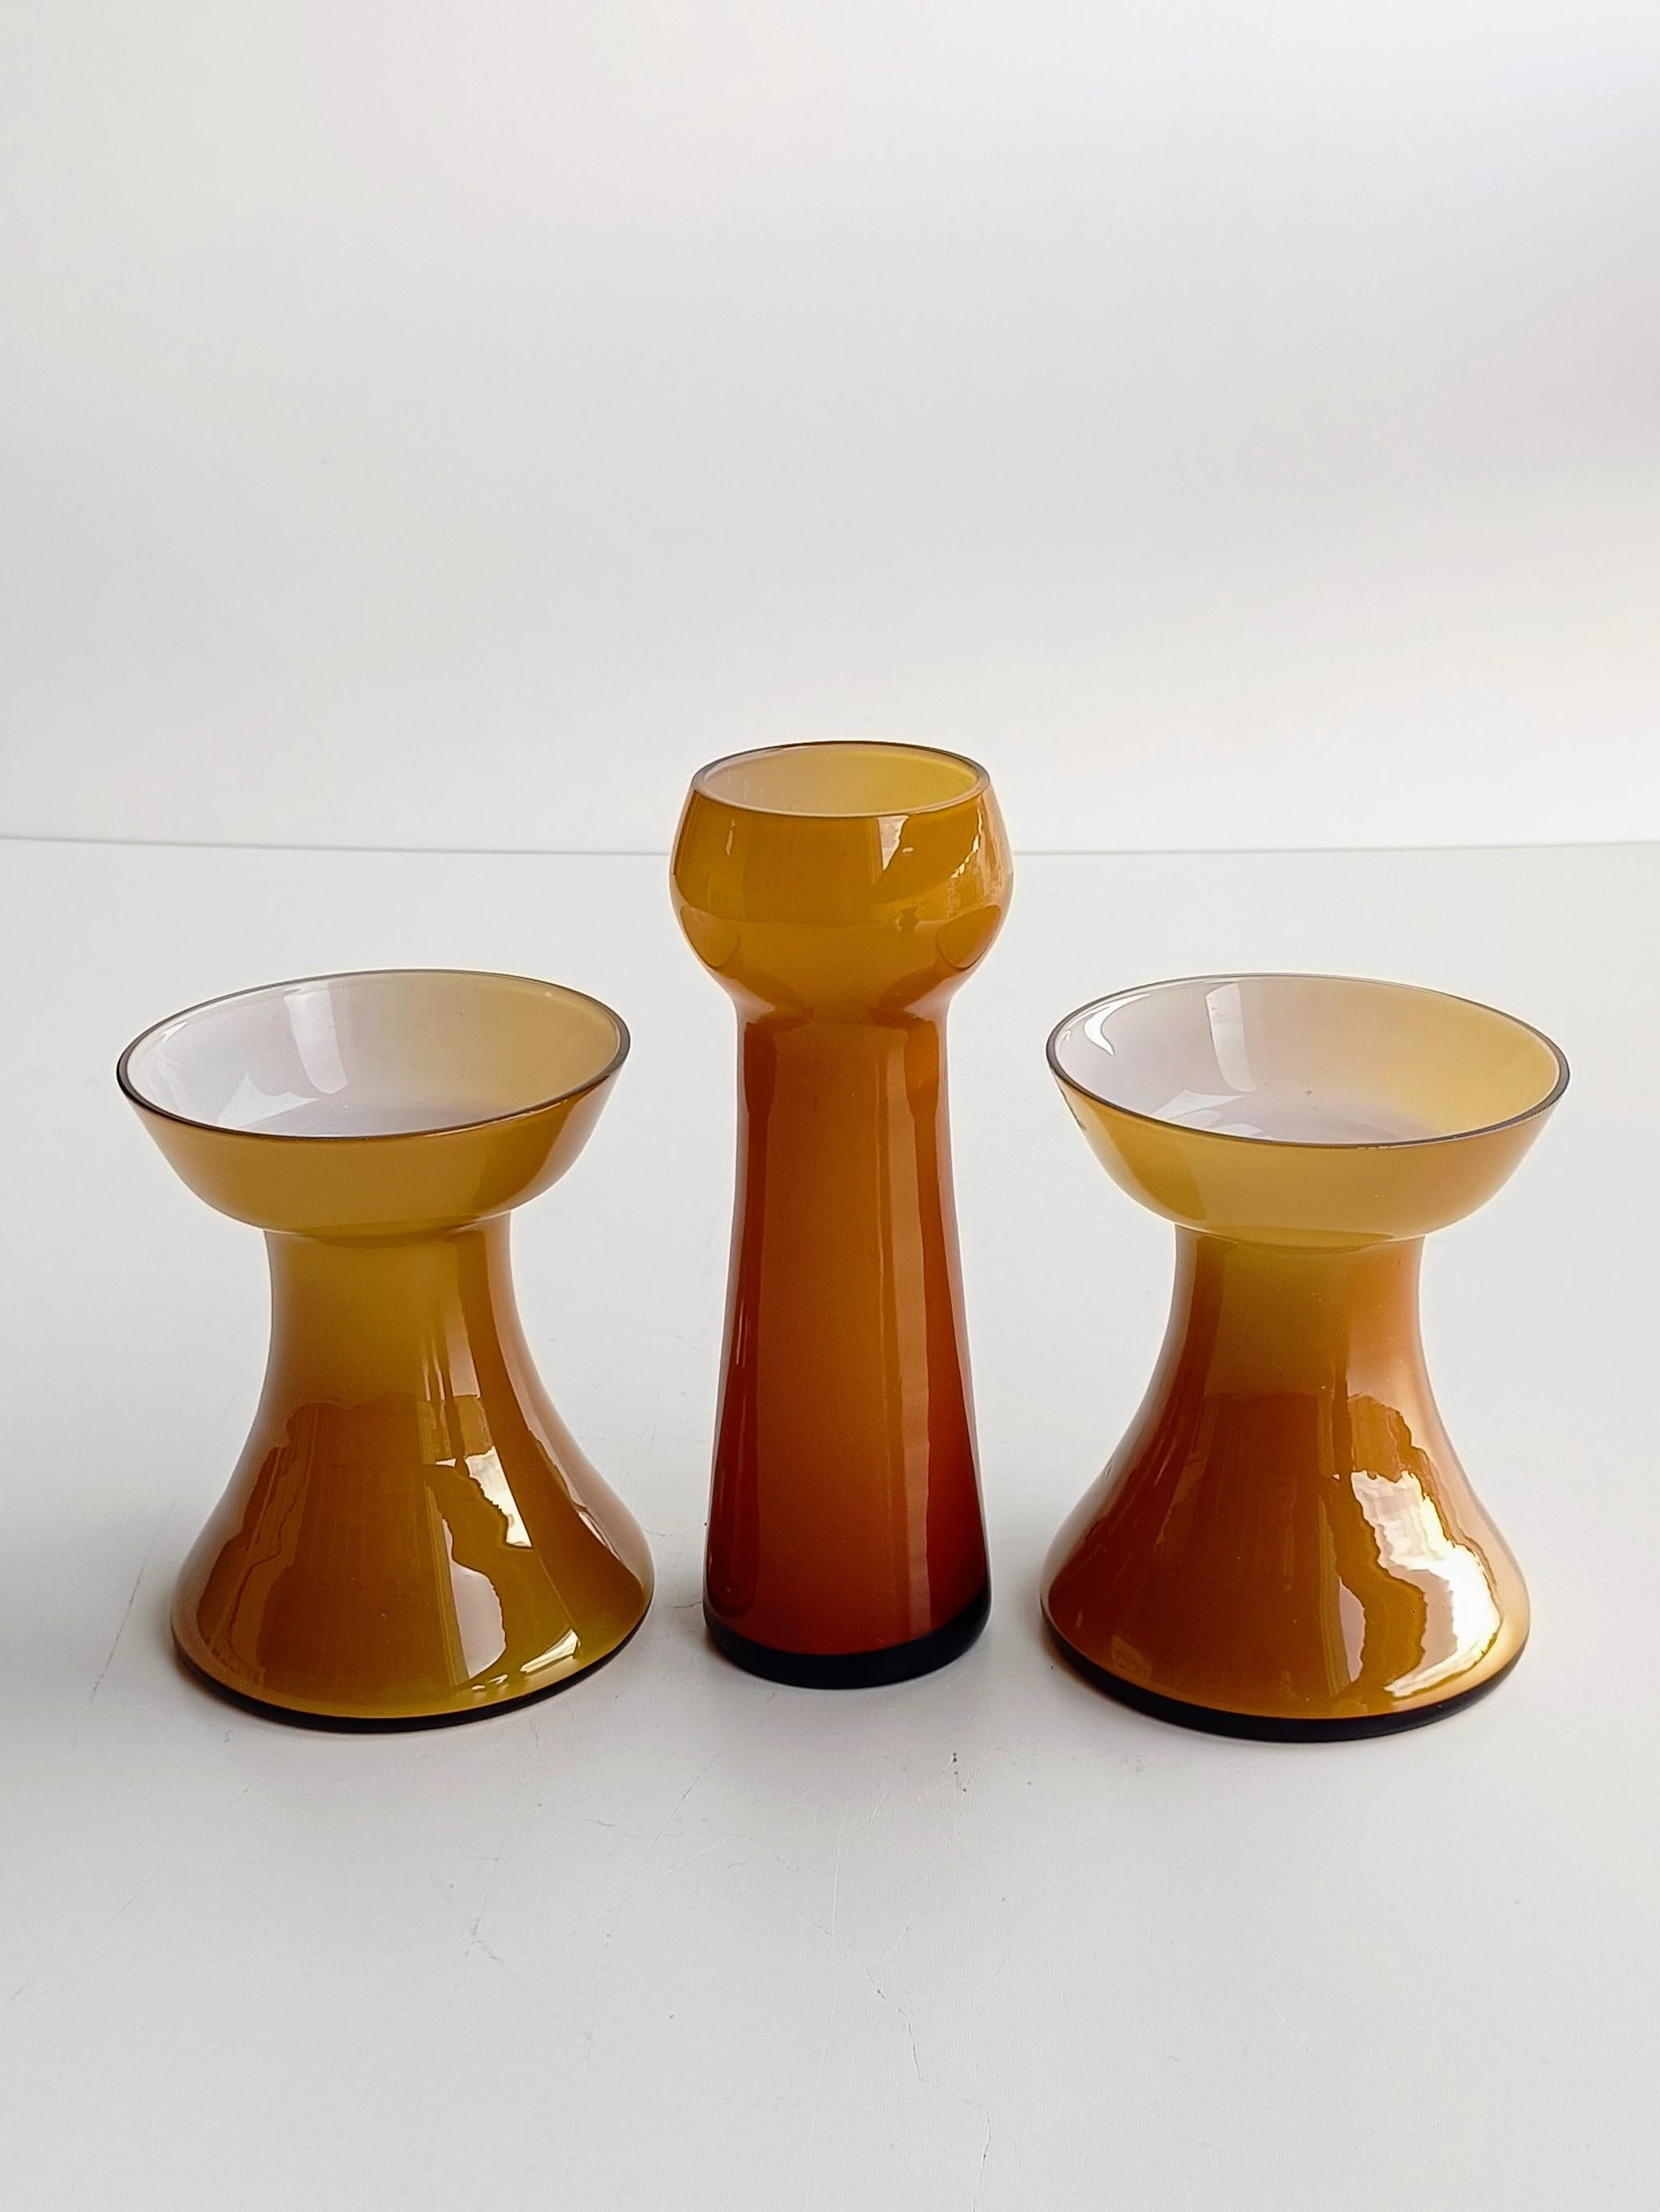 Hand-Crafted Scandinavian Mid Century Alsterfors by Per Olof Ström Set of Candle Holders For Sale